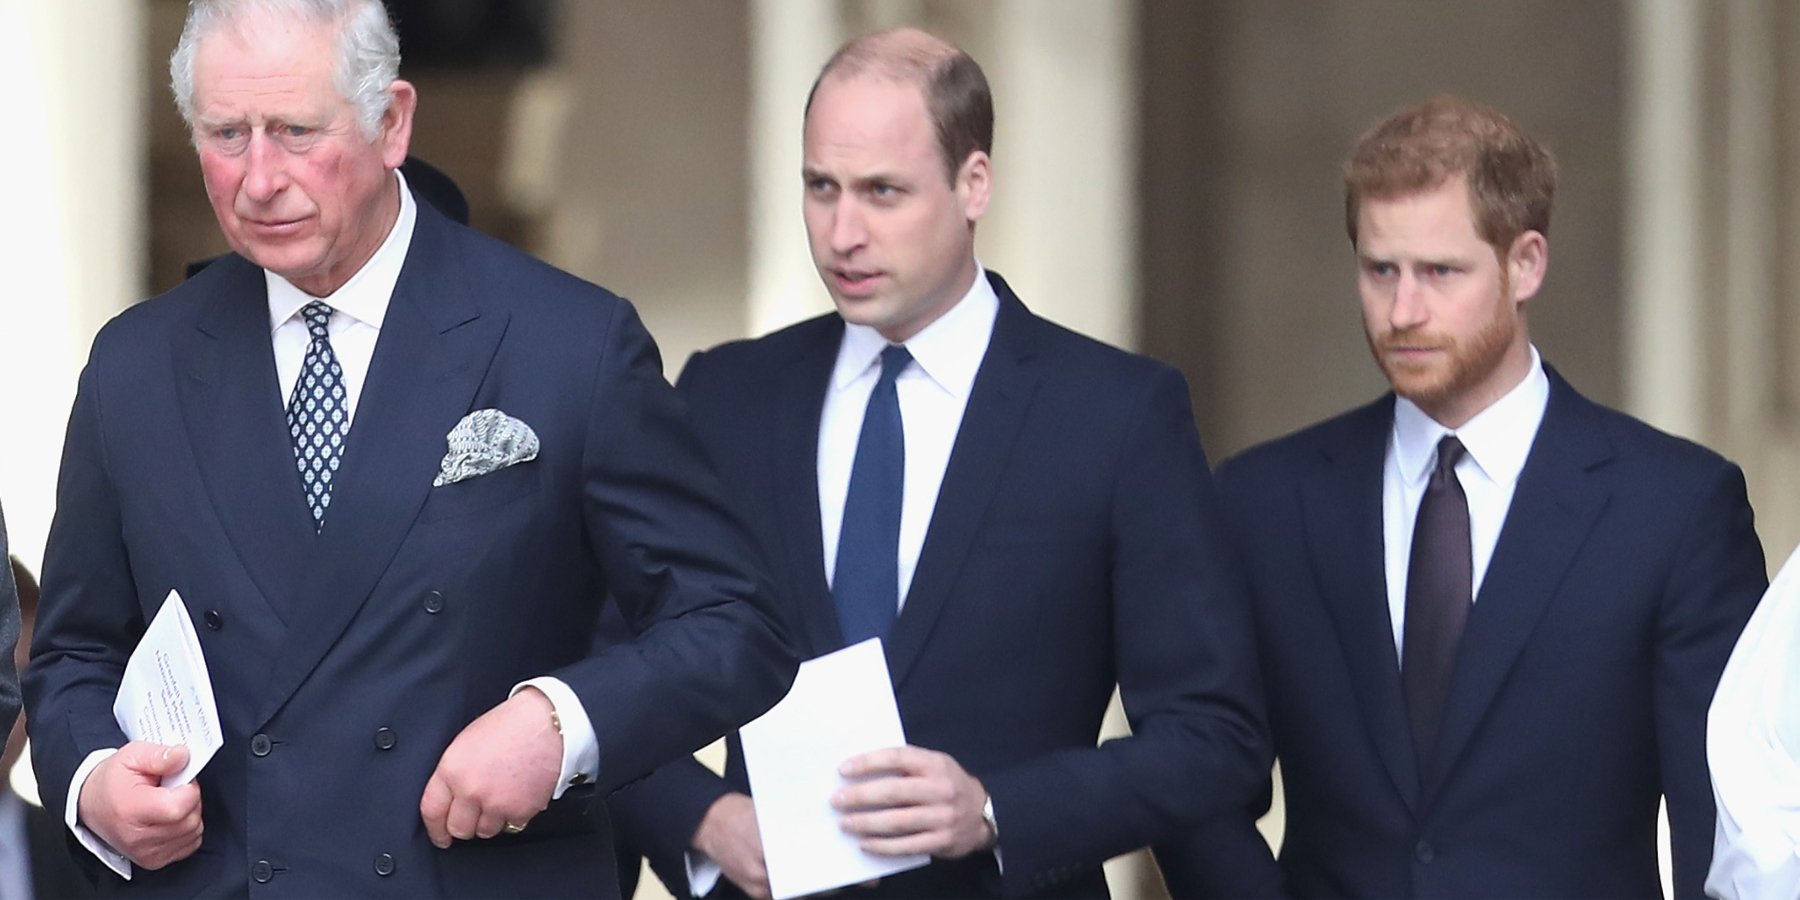 King Charles III, Prince William and Prince Harry in 2017.